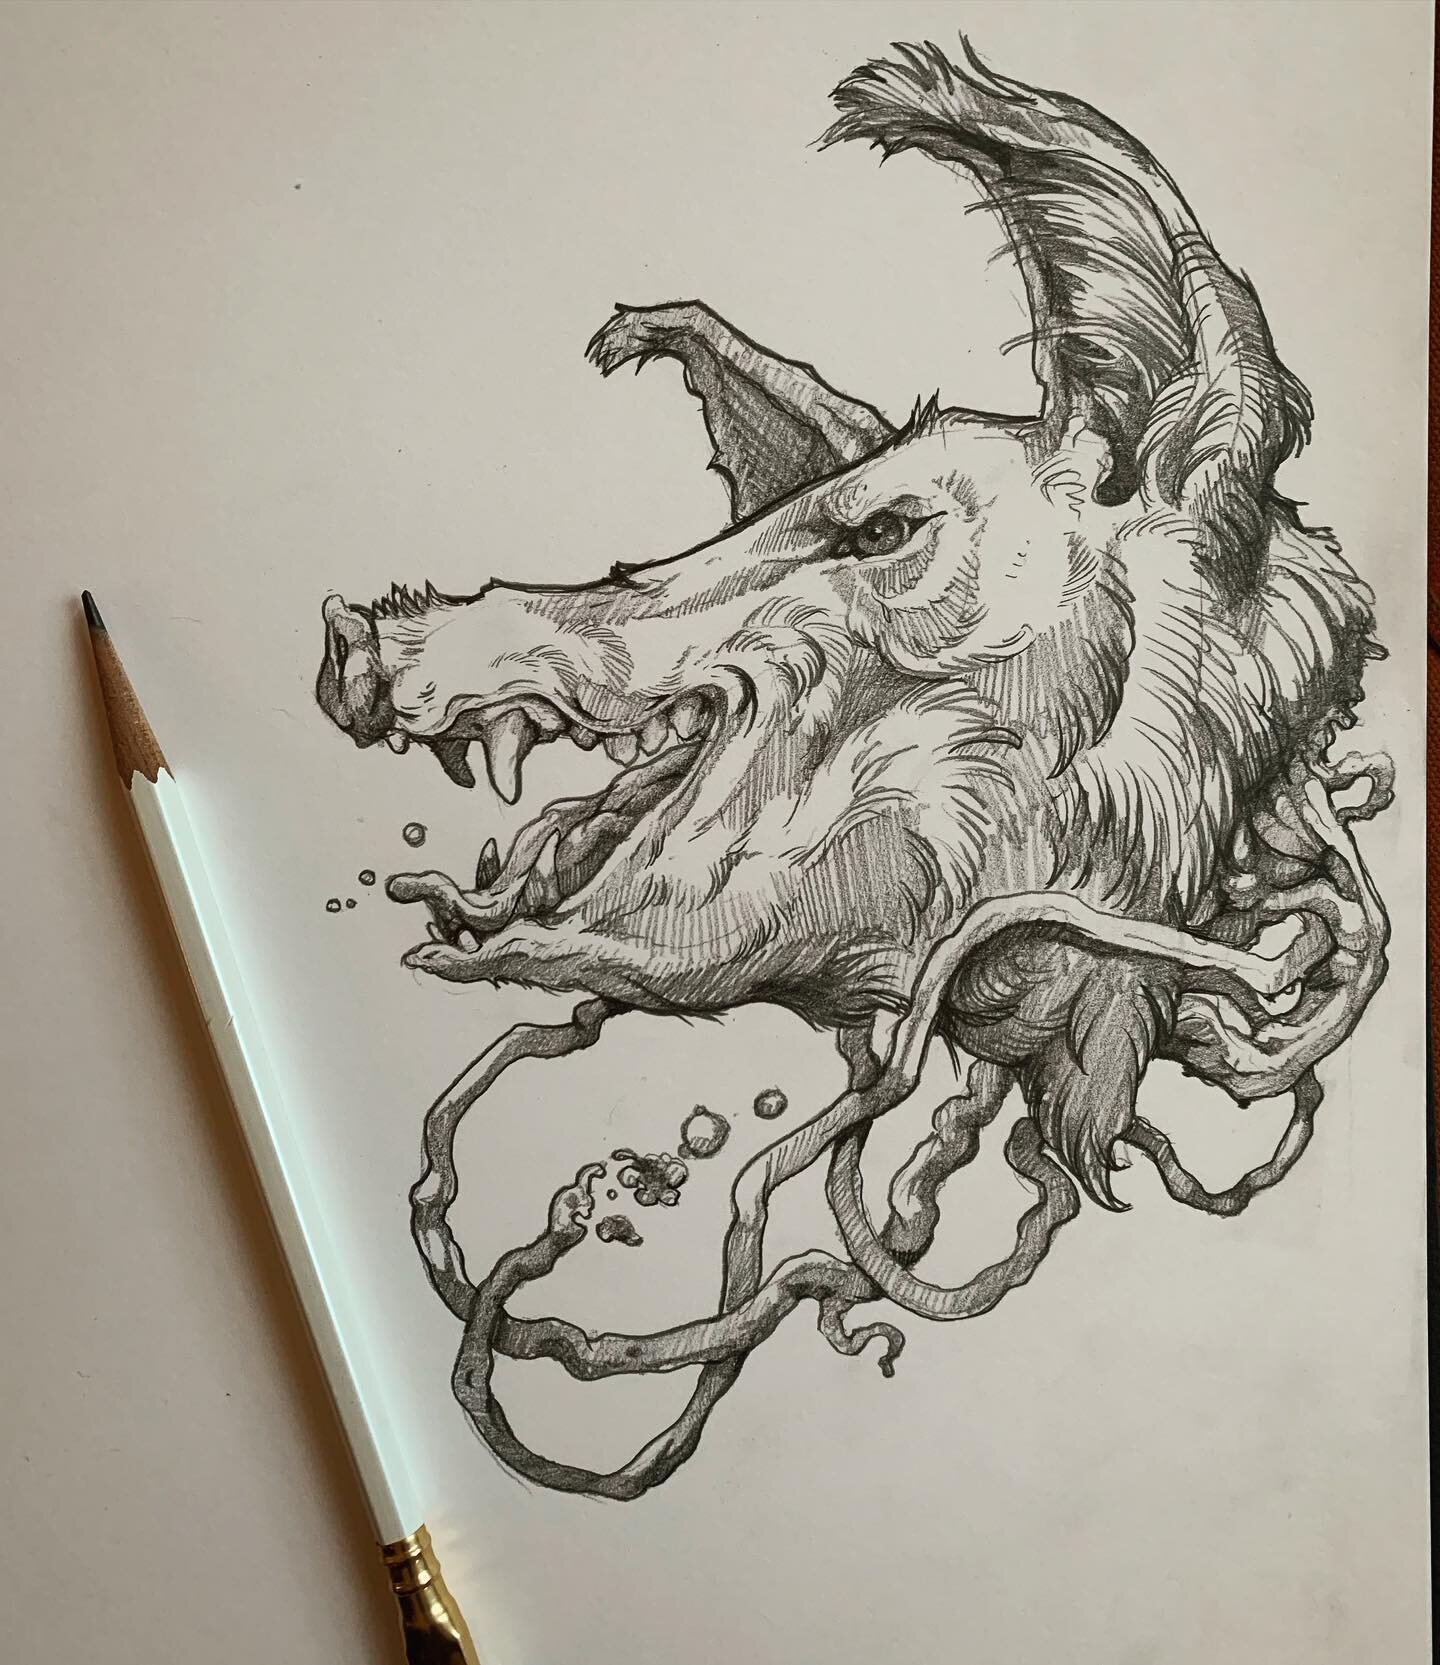 Today&rsquo;s sketch. Inspired by the lovely boar head displayed at @keepsakeokc 
#tattooart #deftones #wildboars #okctattooartist #darkart #natureismetal #crappanther #blackwing #pencilsketch